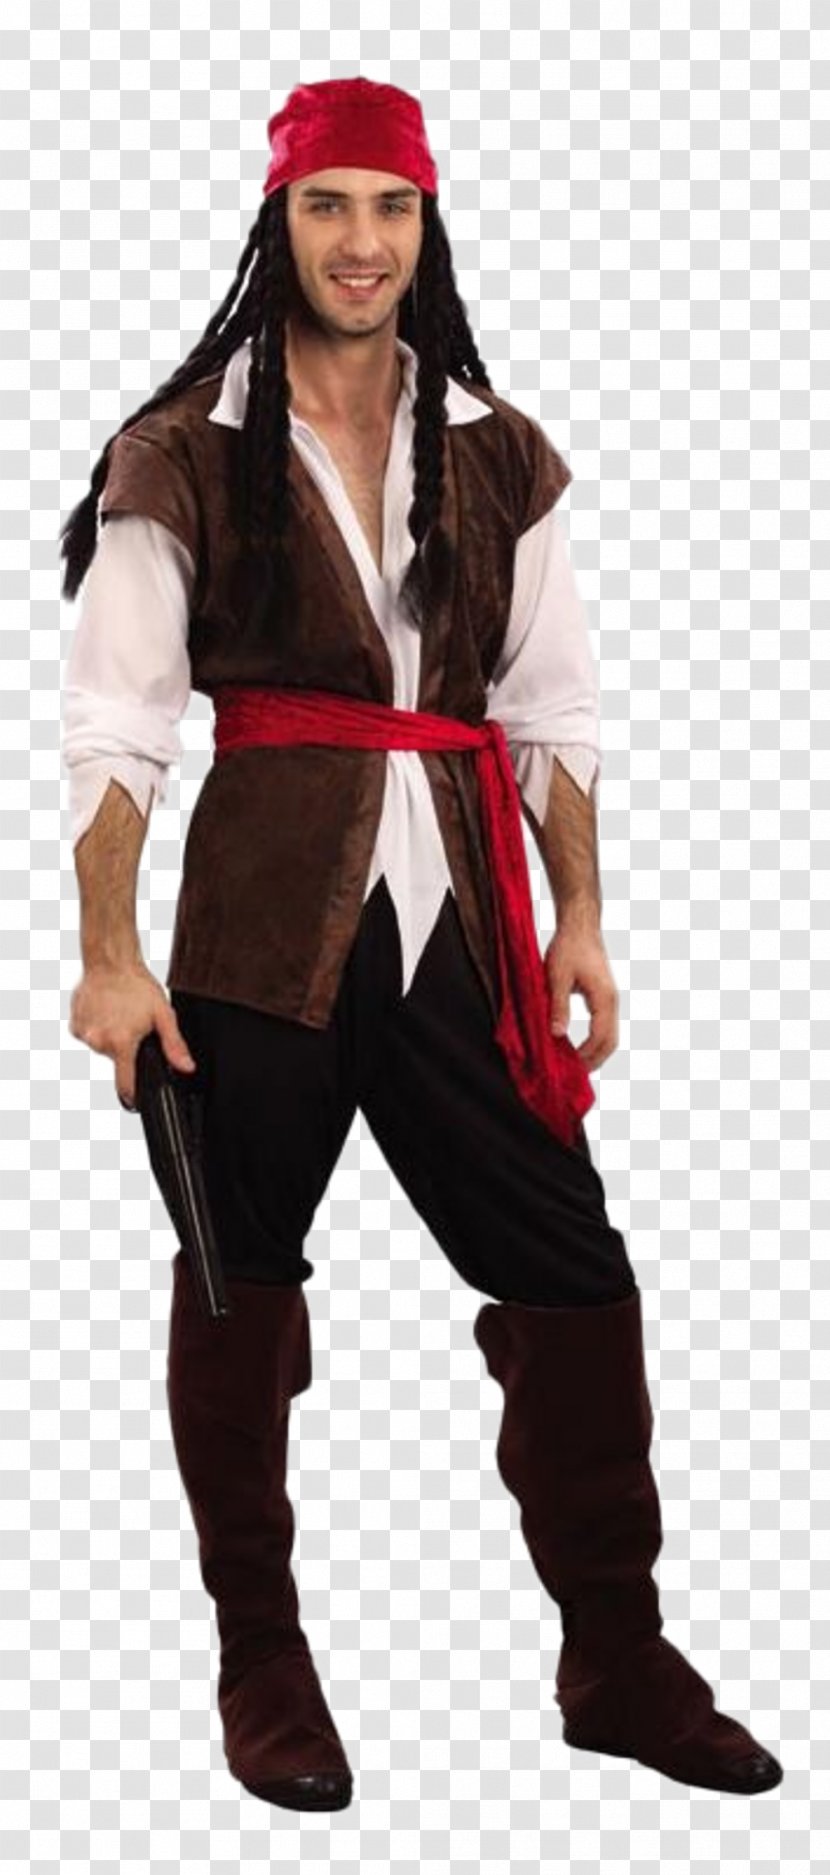 Costume Party Jack Sparrow Piracy Clothing - Adult Transparent PNG